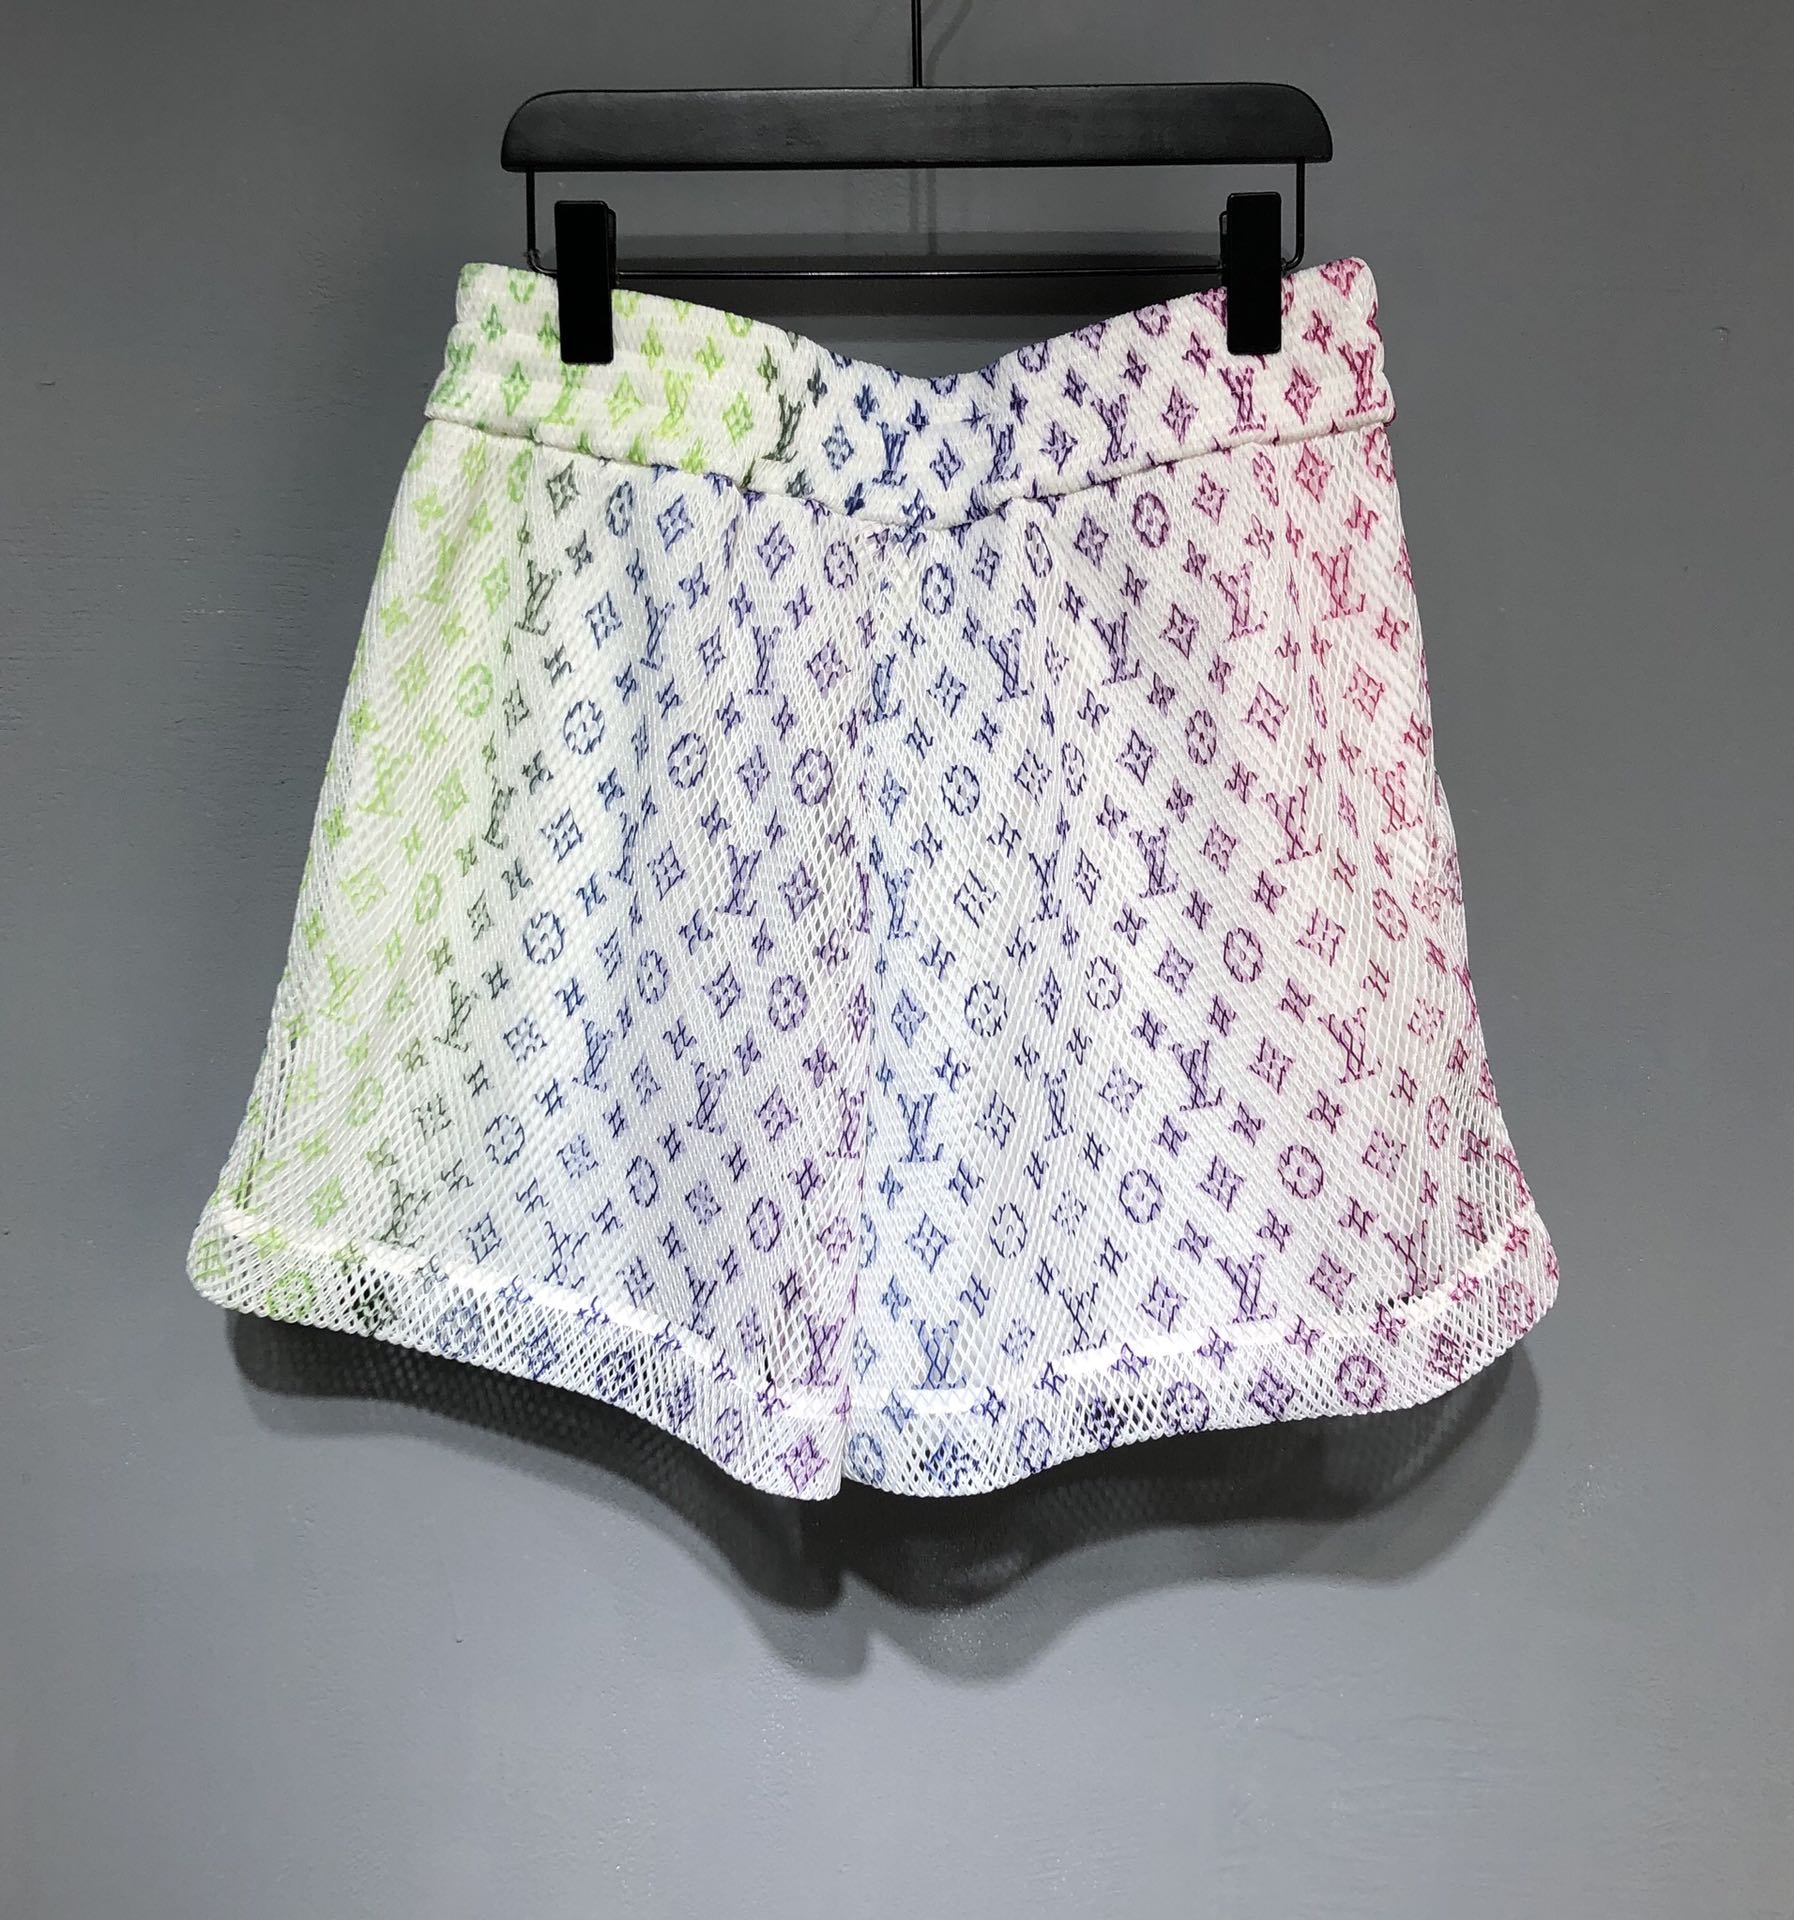 LV 2022SS New arrival Shorts